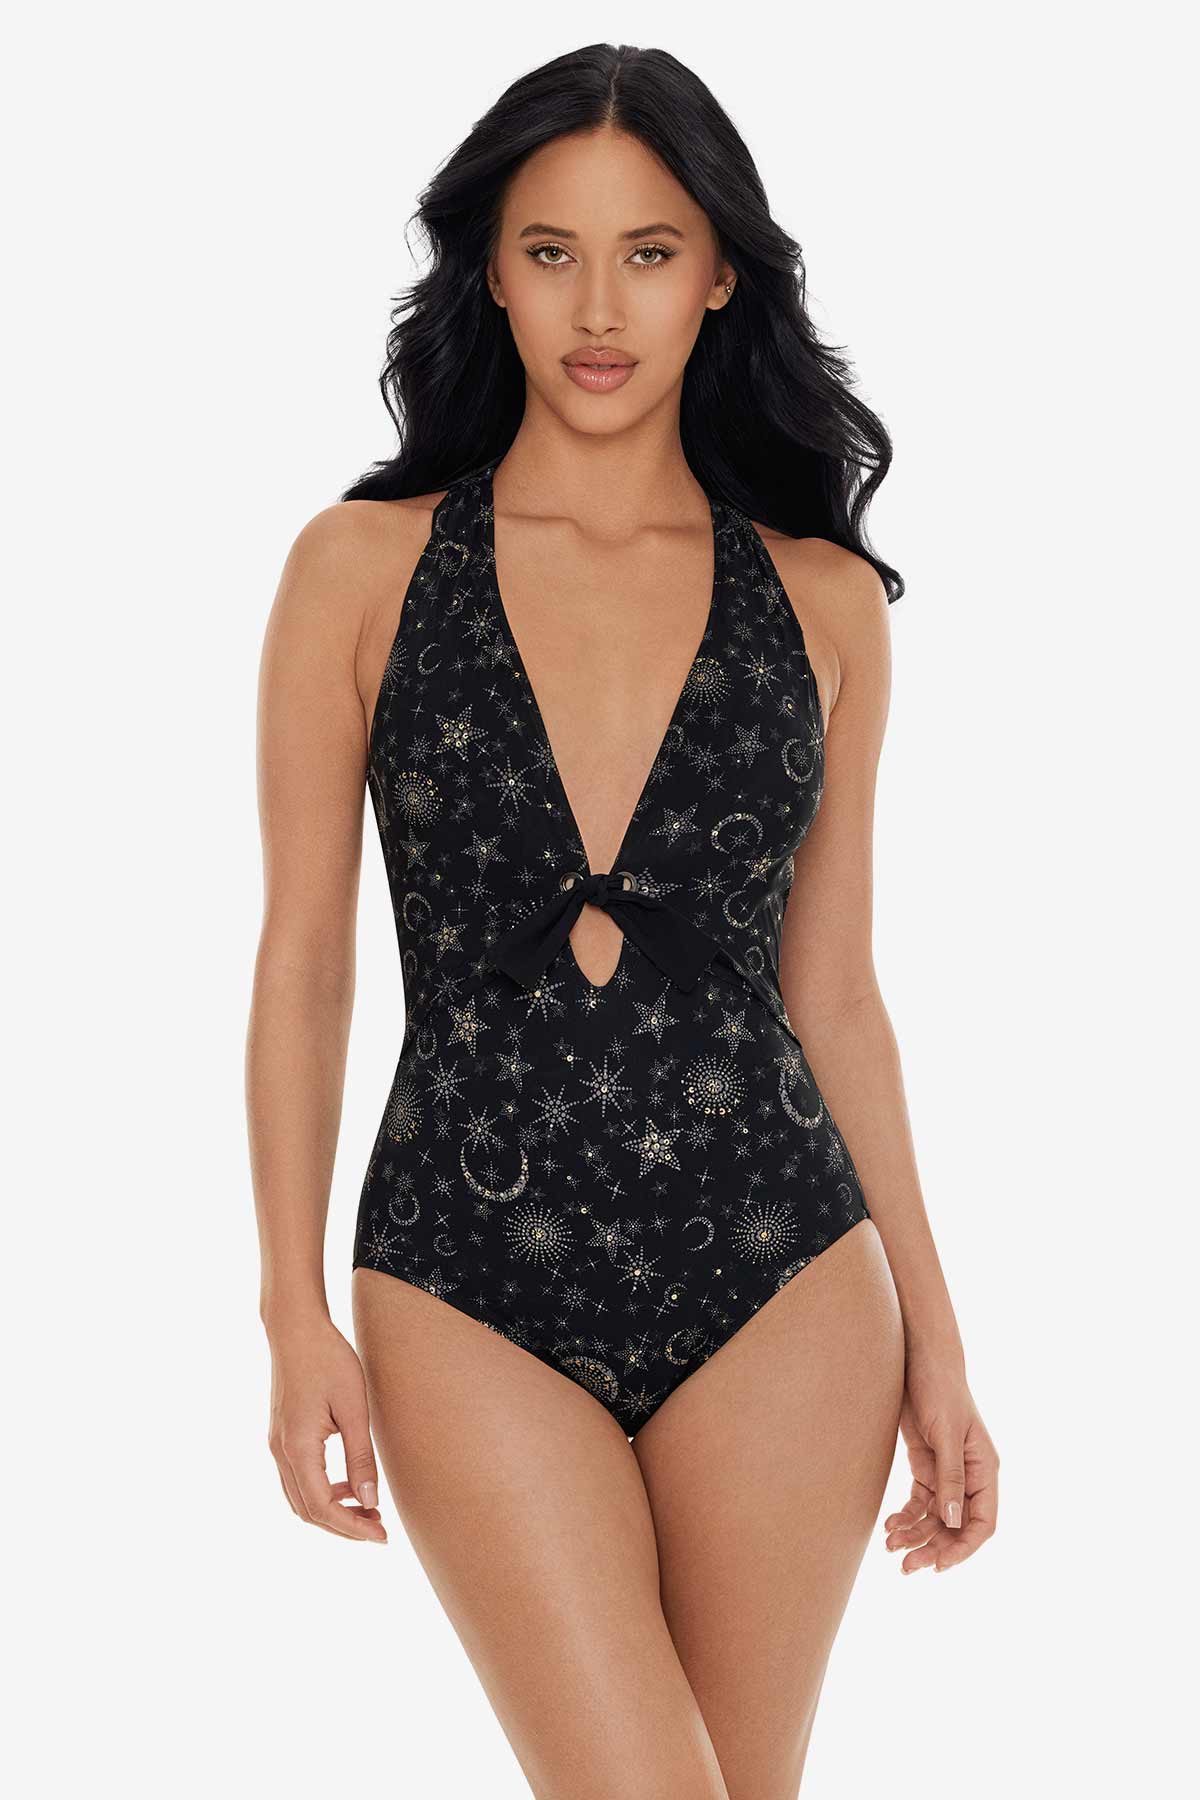 Miraclesuit Swimwear / Bathing Suit − Sale: up to −60%